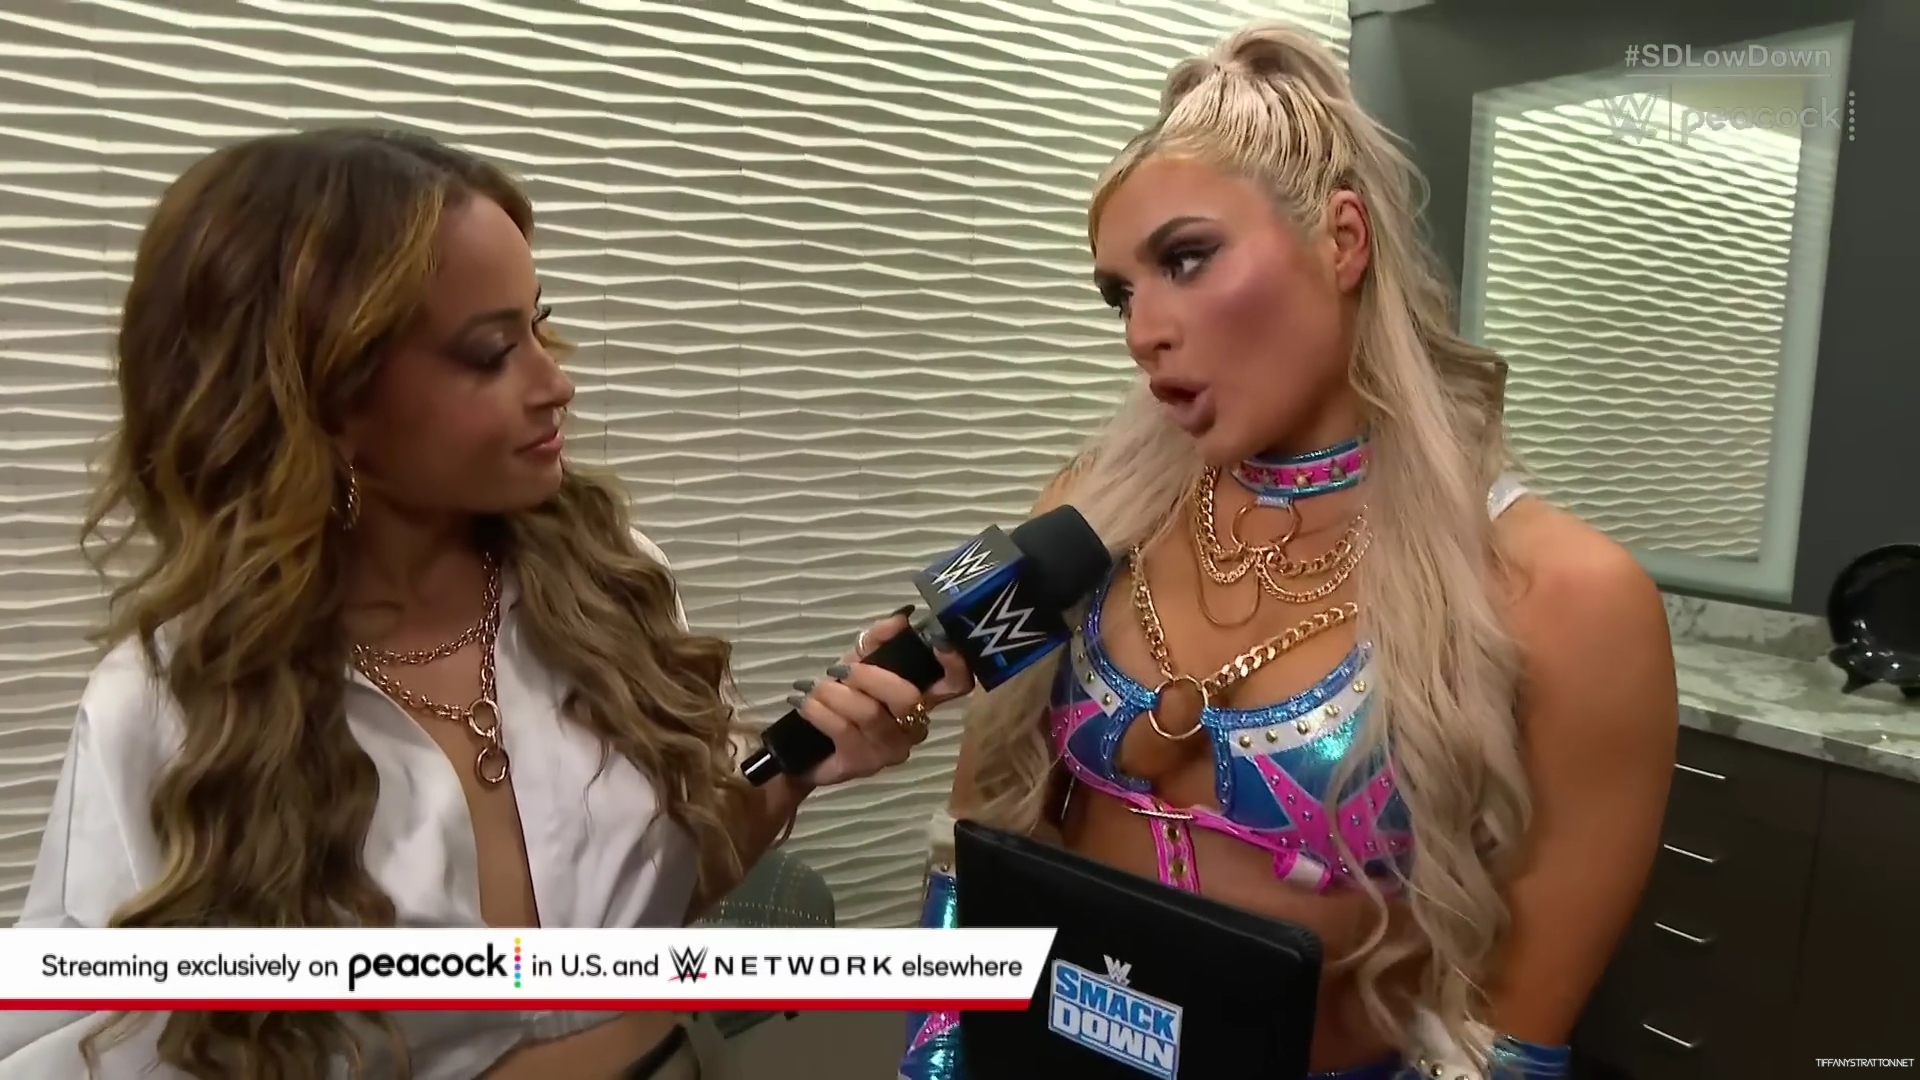 x2mate_com-Tiffany_Stratton_is_officially_on_SmackDown__SmackDown_LowDown__Feb__22C_2023-281080p29_mp40042.jpg